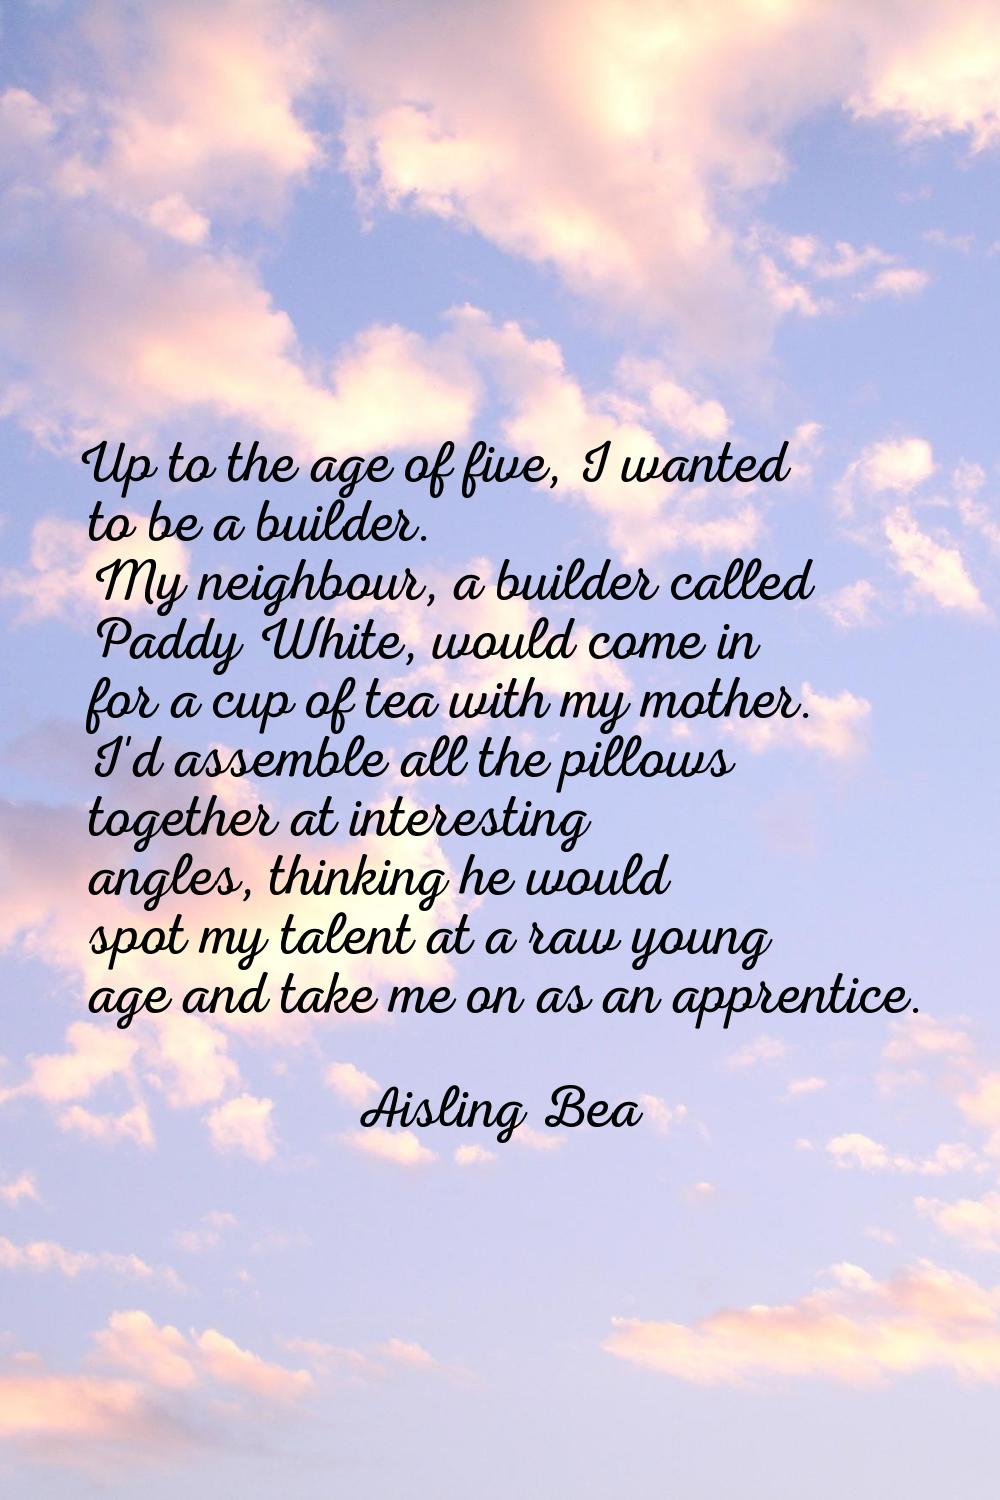 Up to the age of five, I wanted to be a builder. My neighbour, a builder called Paddy White, would 